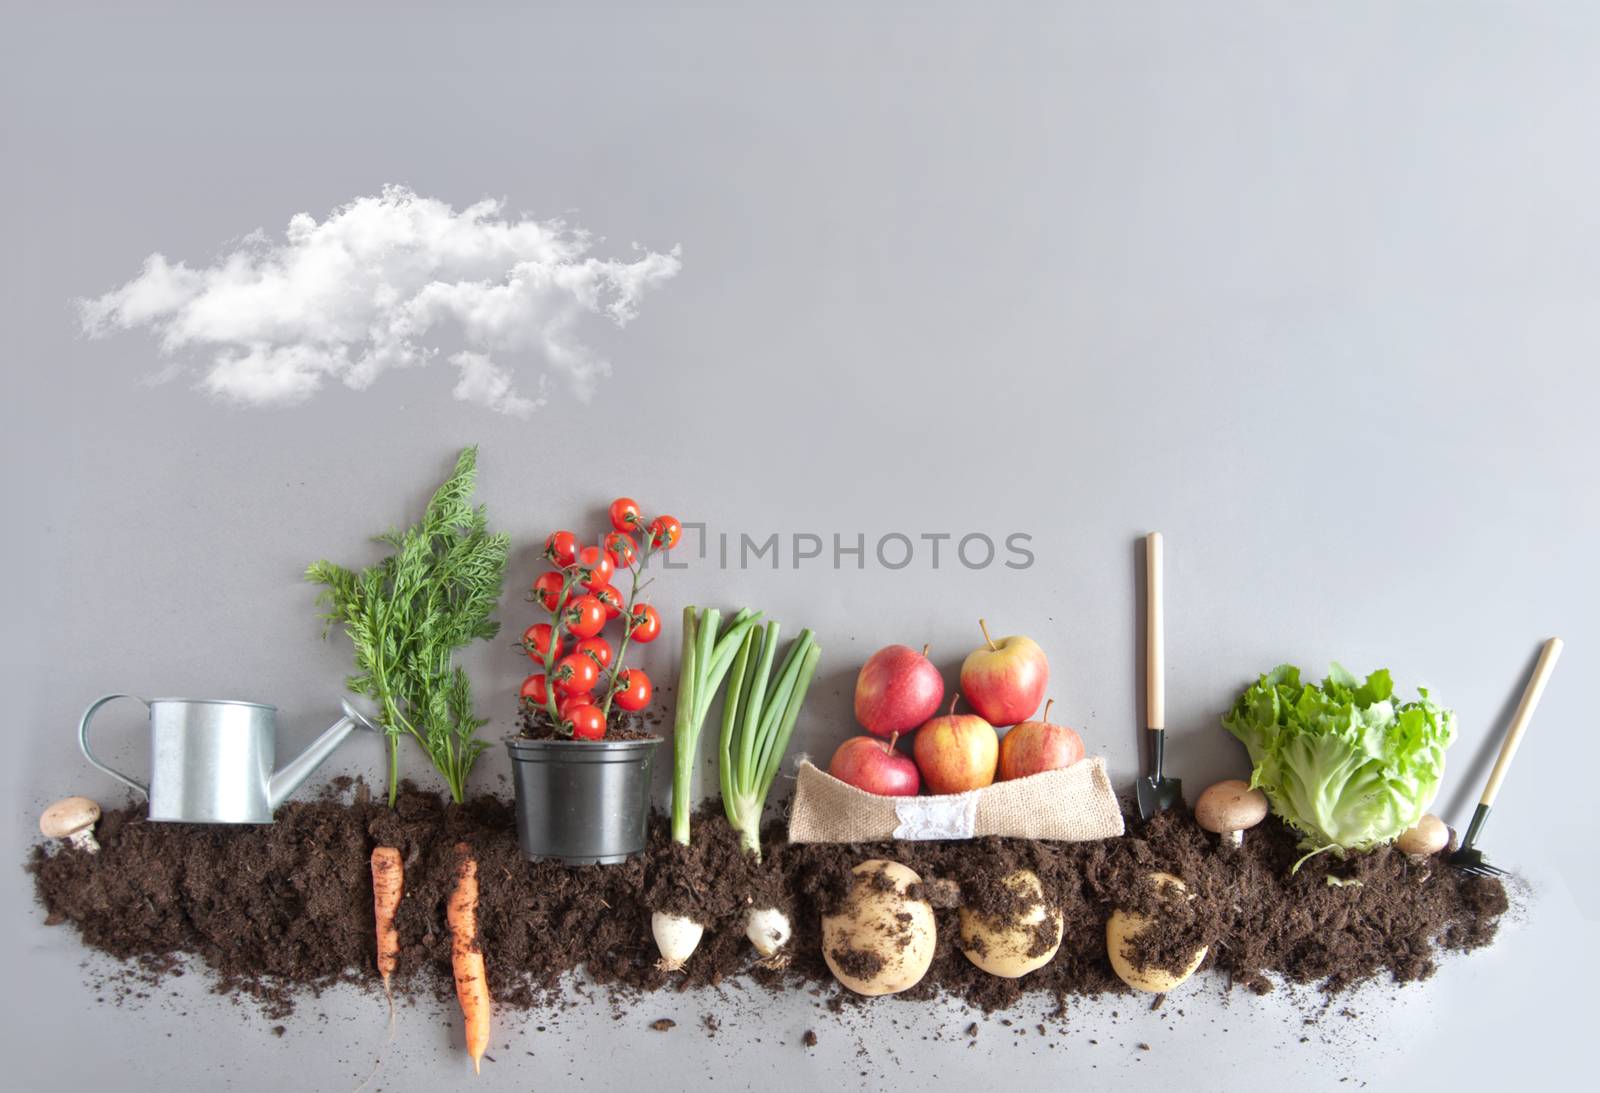 Fruit and vegetable garden by unikpix